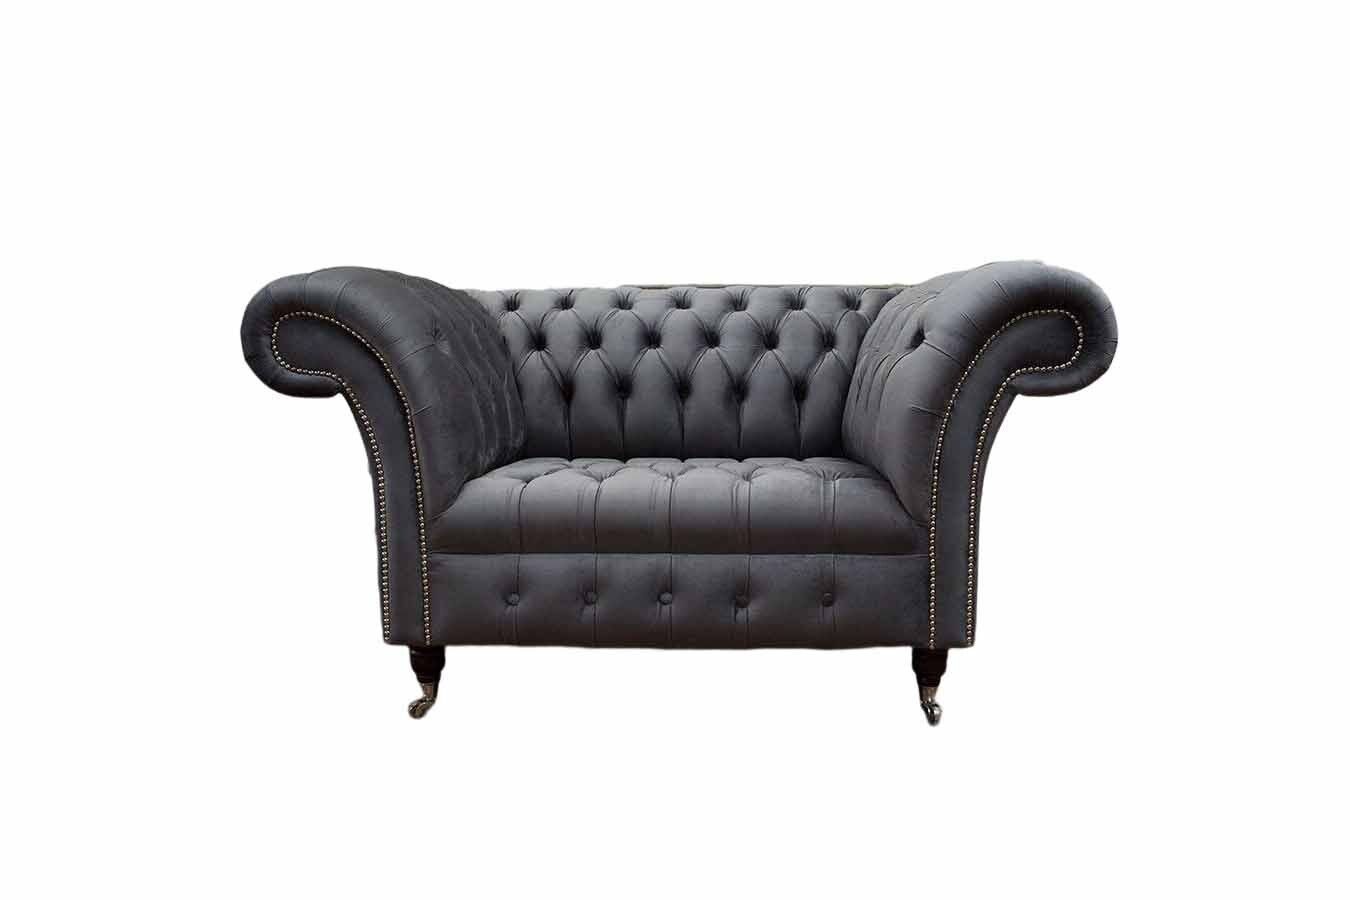 JVmoebel Sofa Graue Chesterfield Design Stoff Couch Sessel 1.5 Sitz Polster, Made In Europe